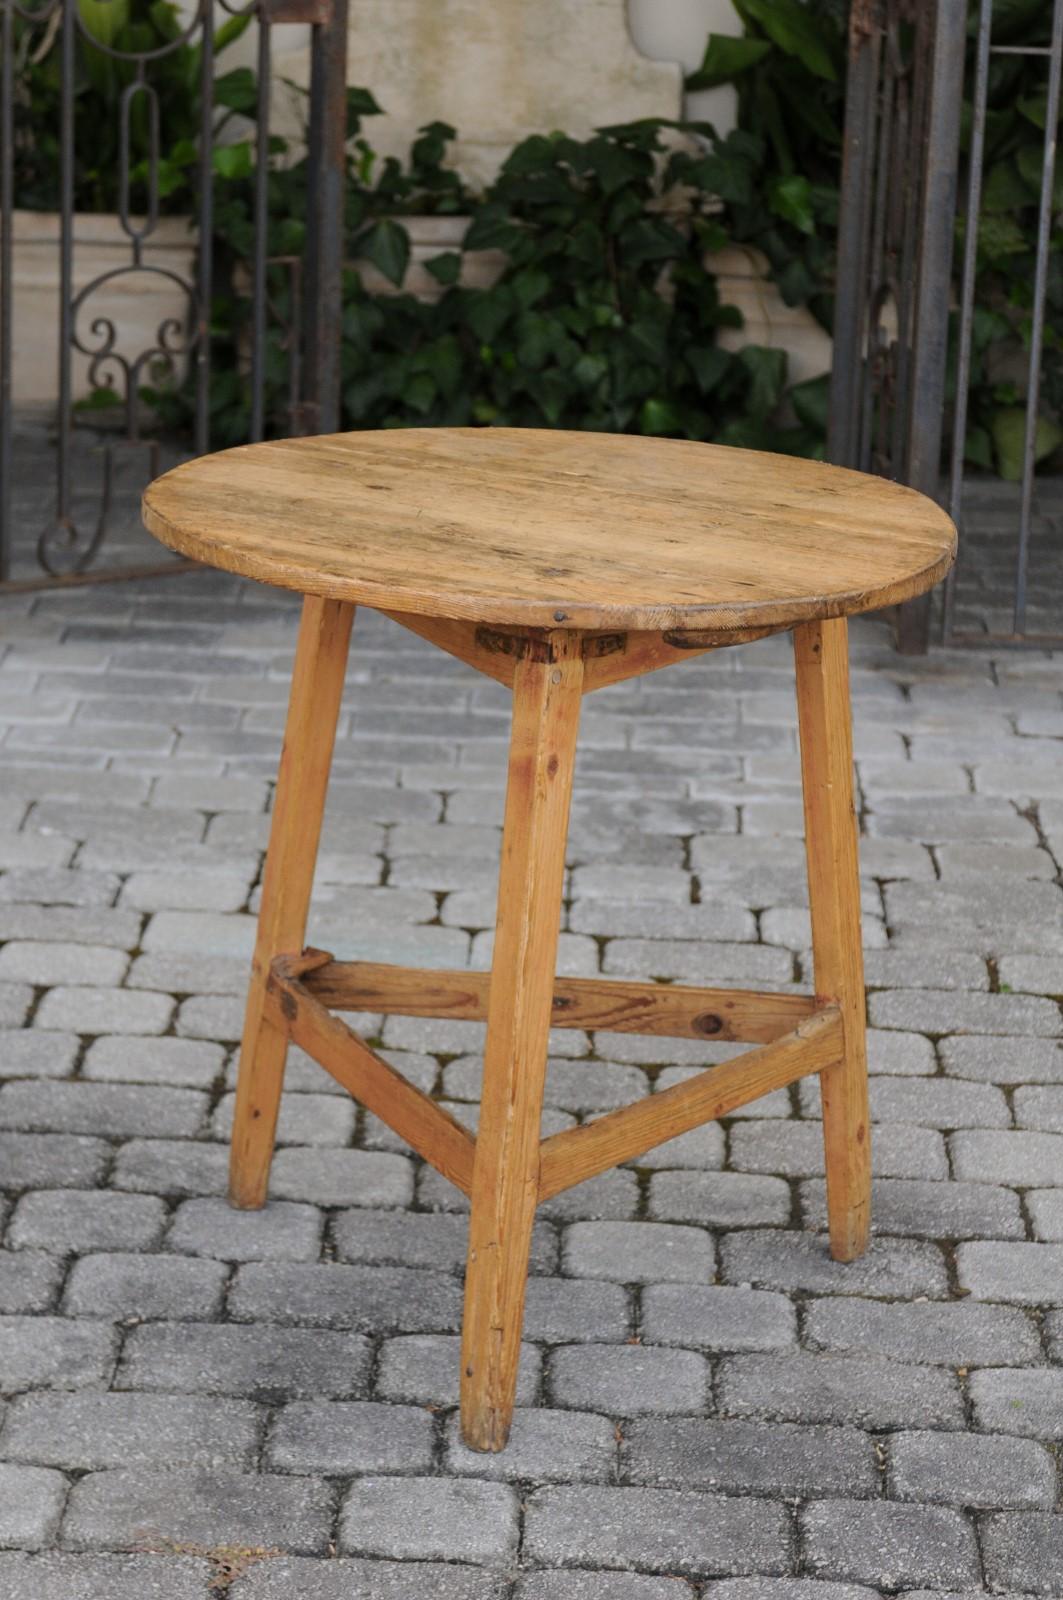 An English rustic pine cricket table from the late 19th century, with circular top and triangular side stretcher. Born during the last quarter of the 19th century, this rustic cricket side table features a circular top, sitting above a simple